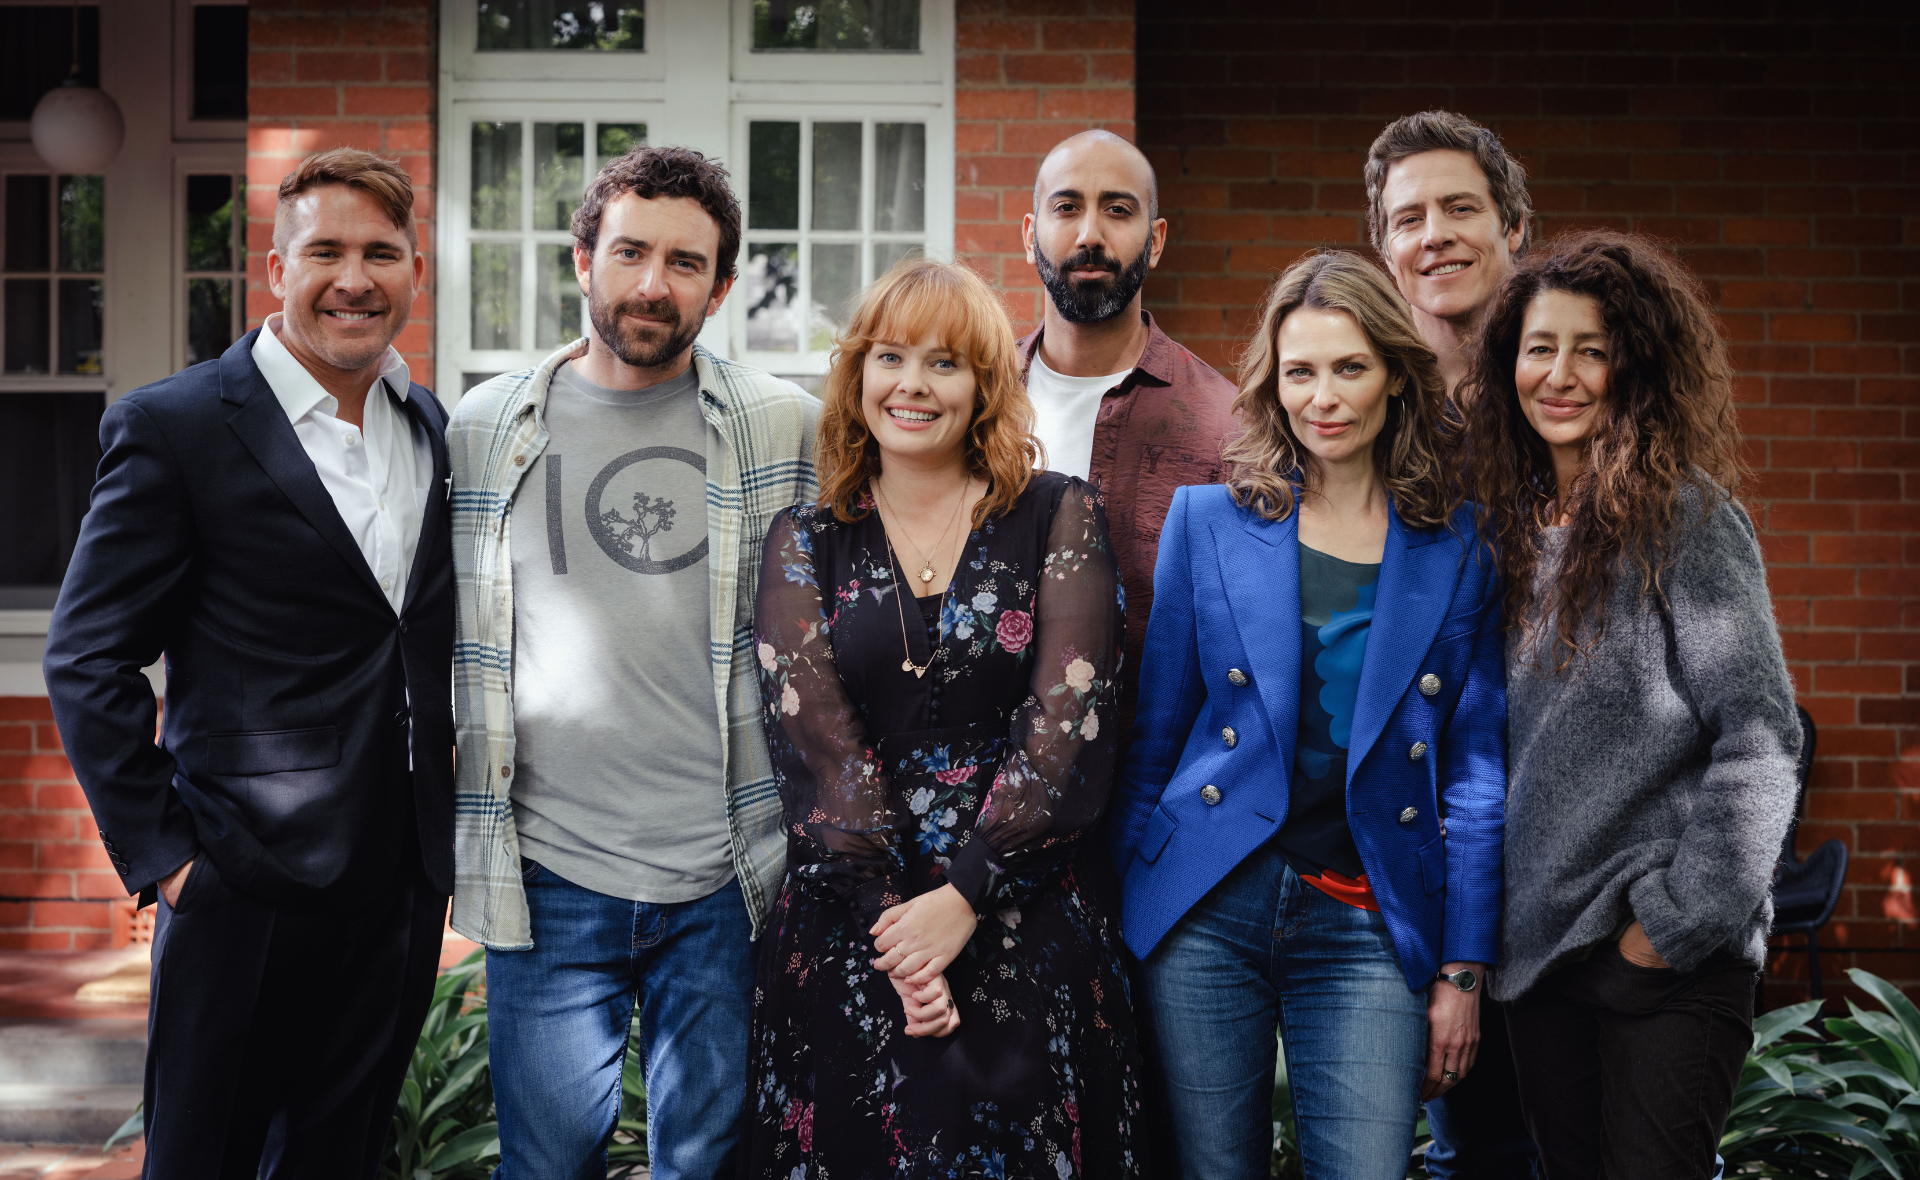 “It’s a very dysfunctional family”: Will the Five Bedrooms fourth season live up to expectations?